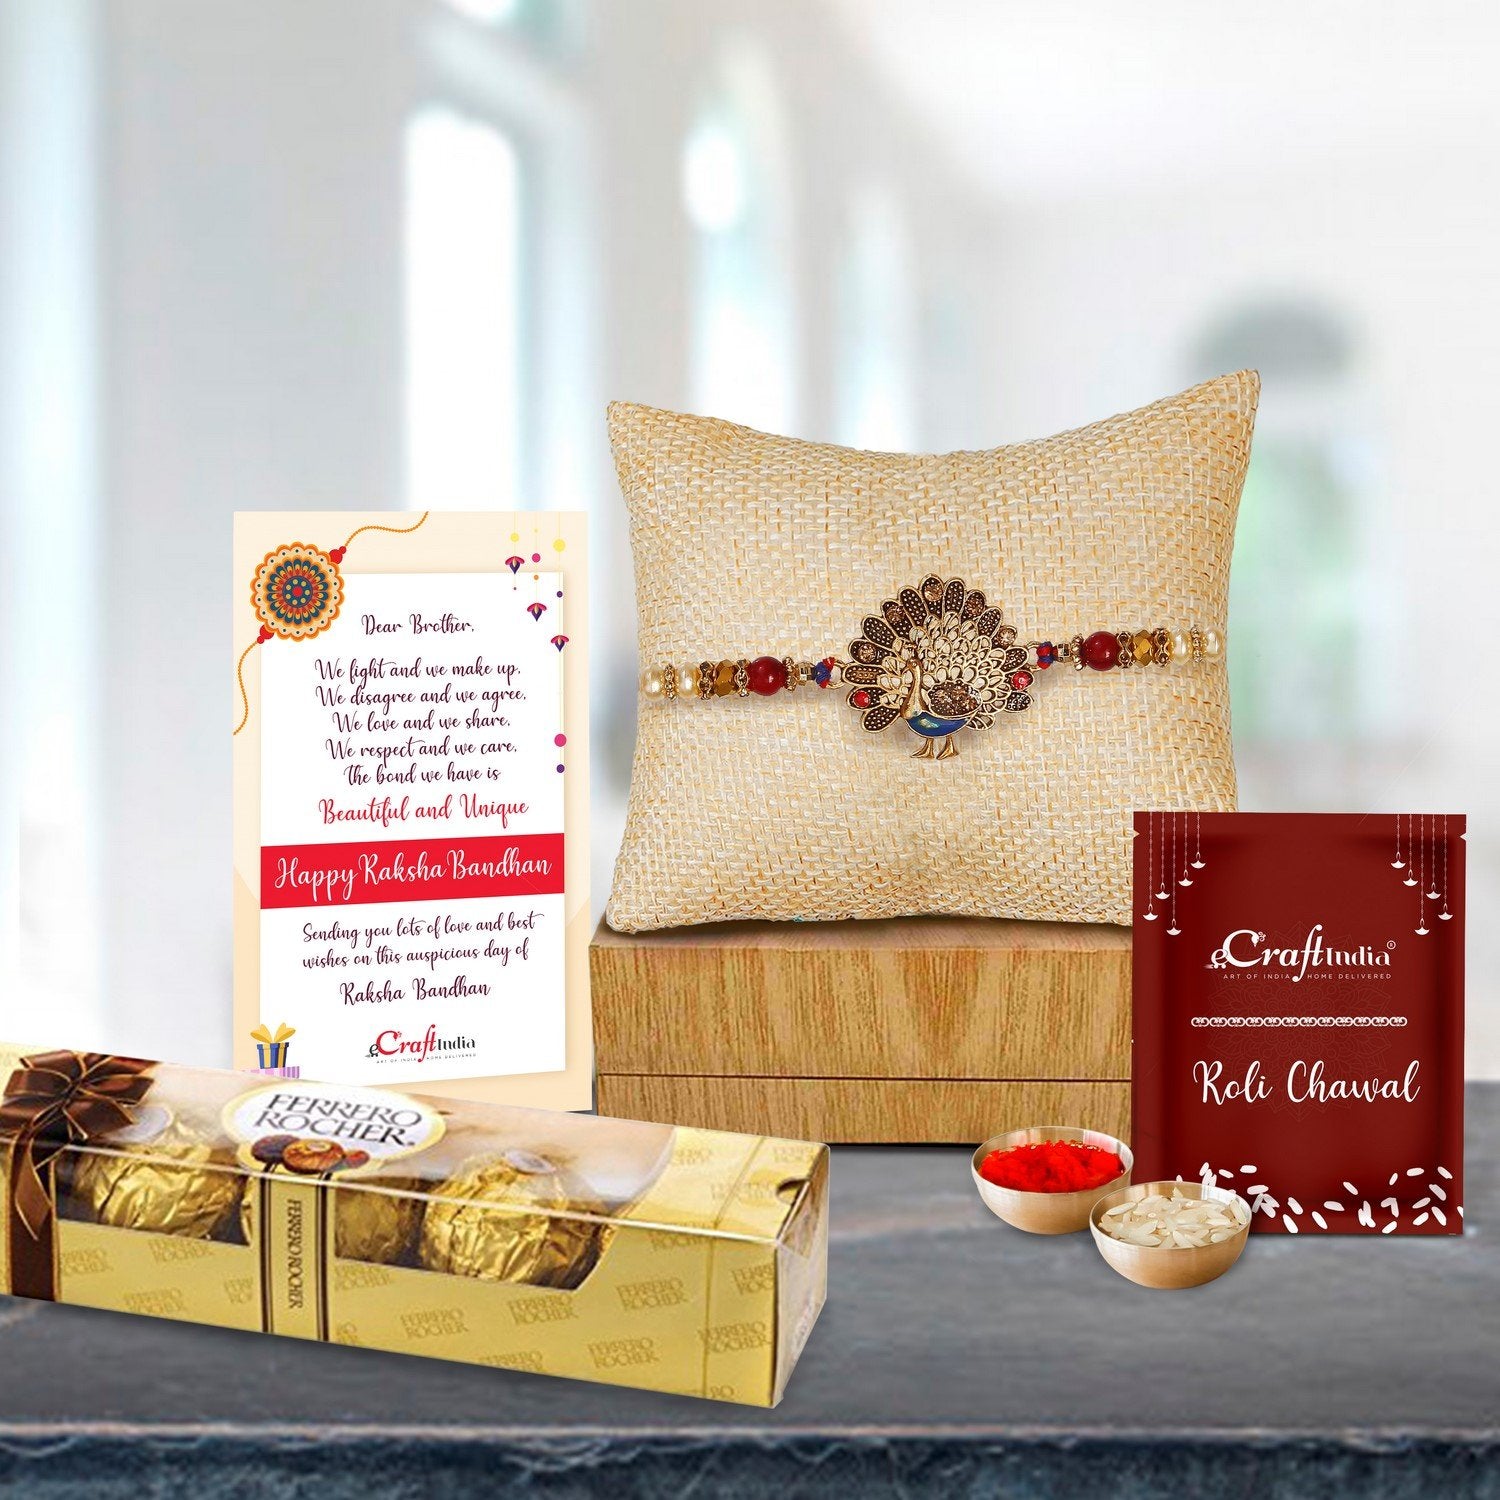 Designer Dancing Peacock Rakhi with Ferrero Rocher (4 pcs) and Roli Chawal Pack, Best Wishes Greeting Card